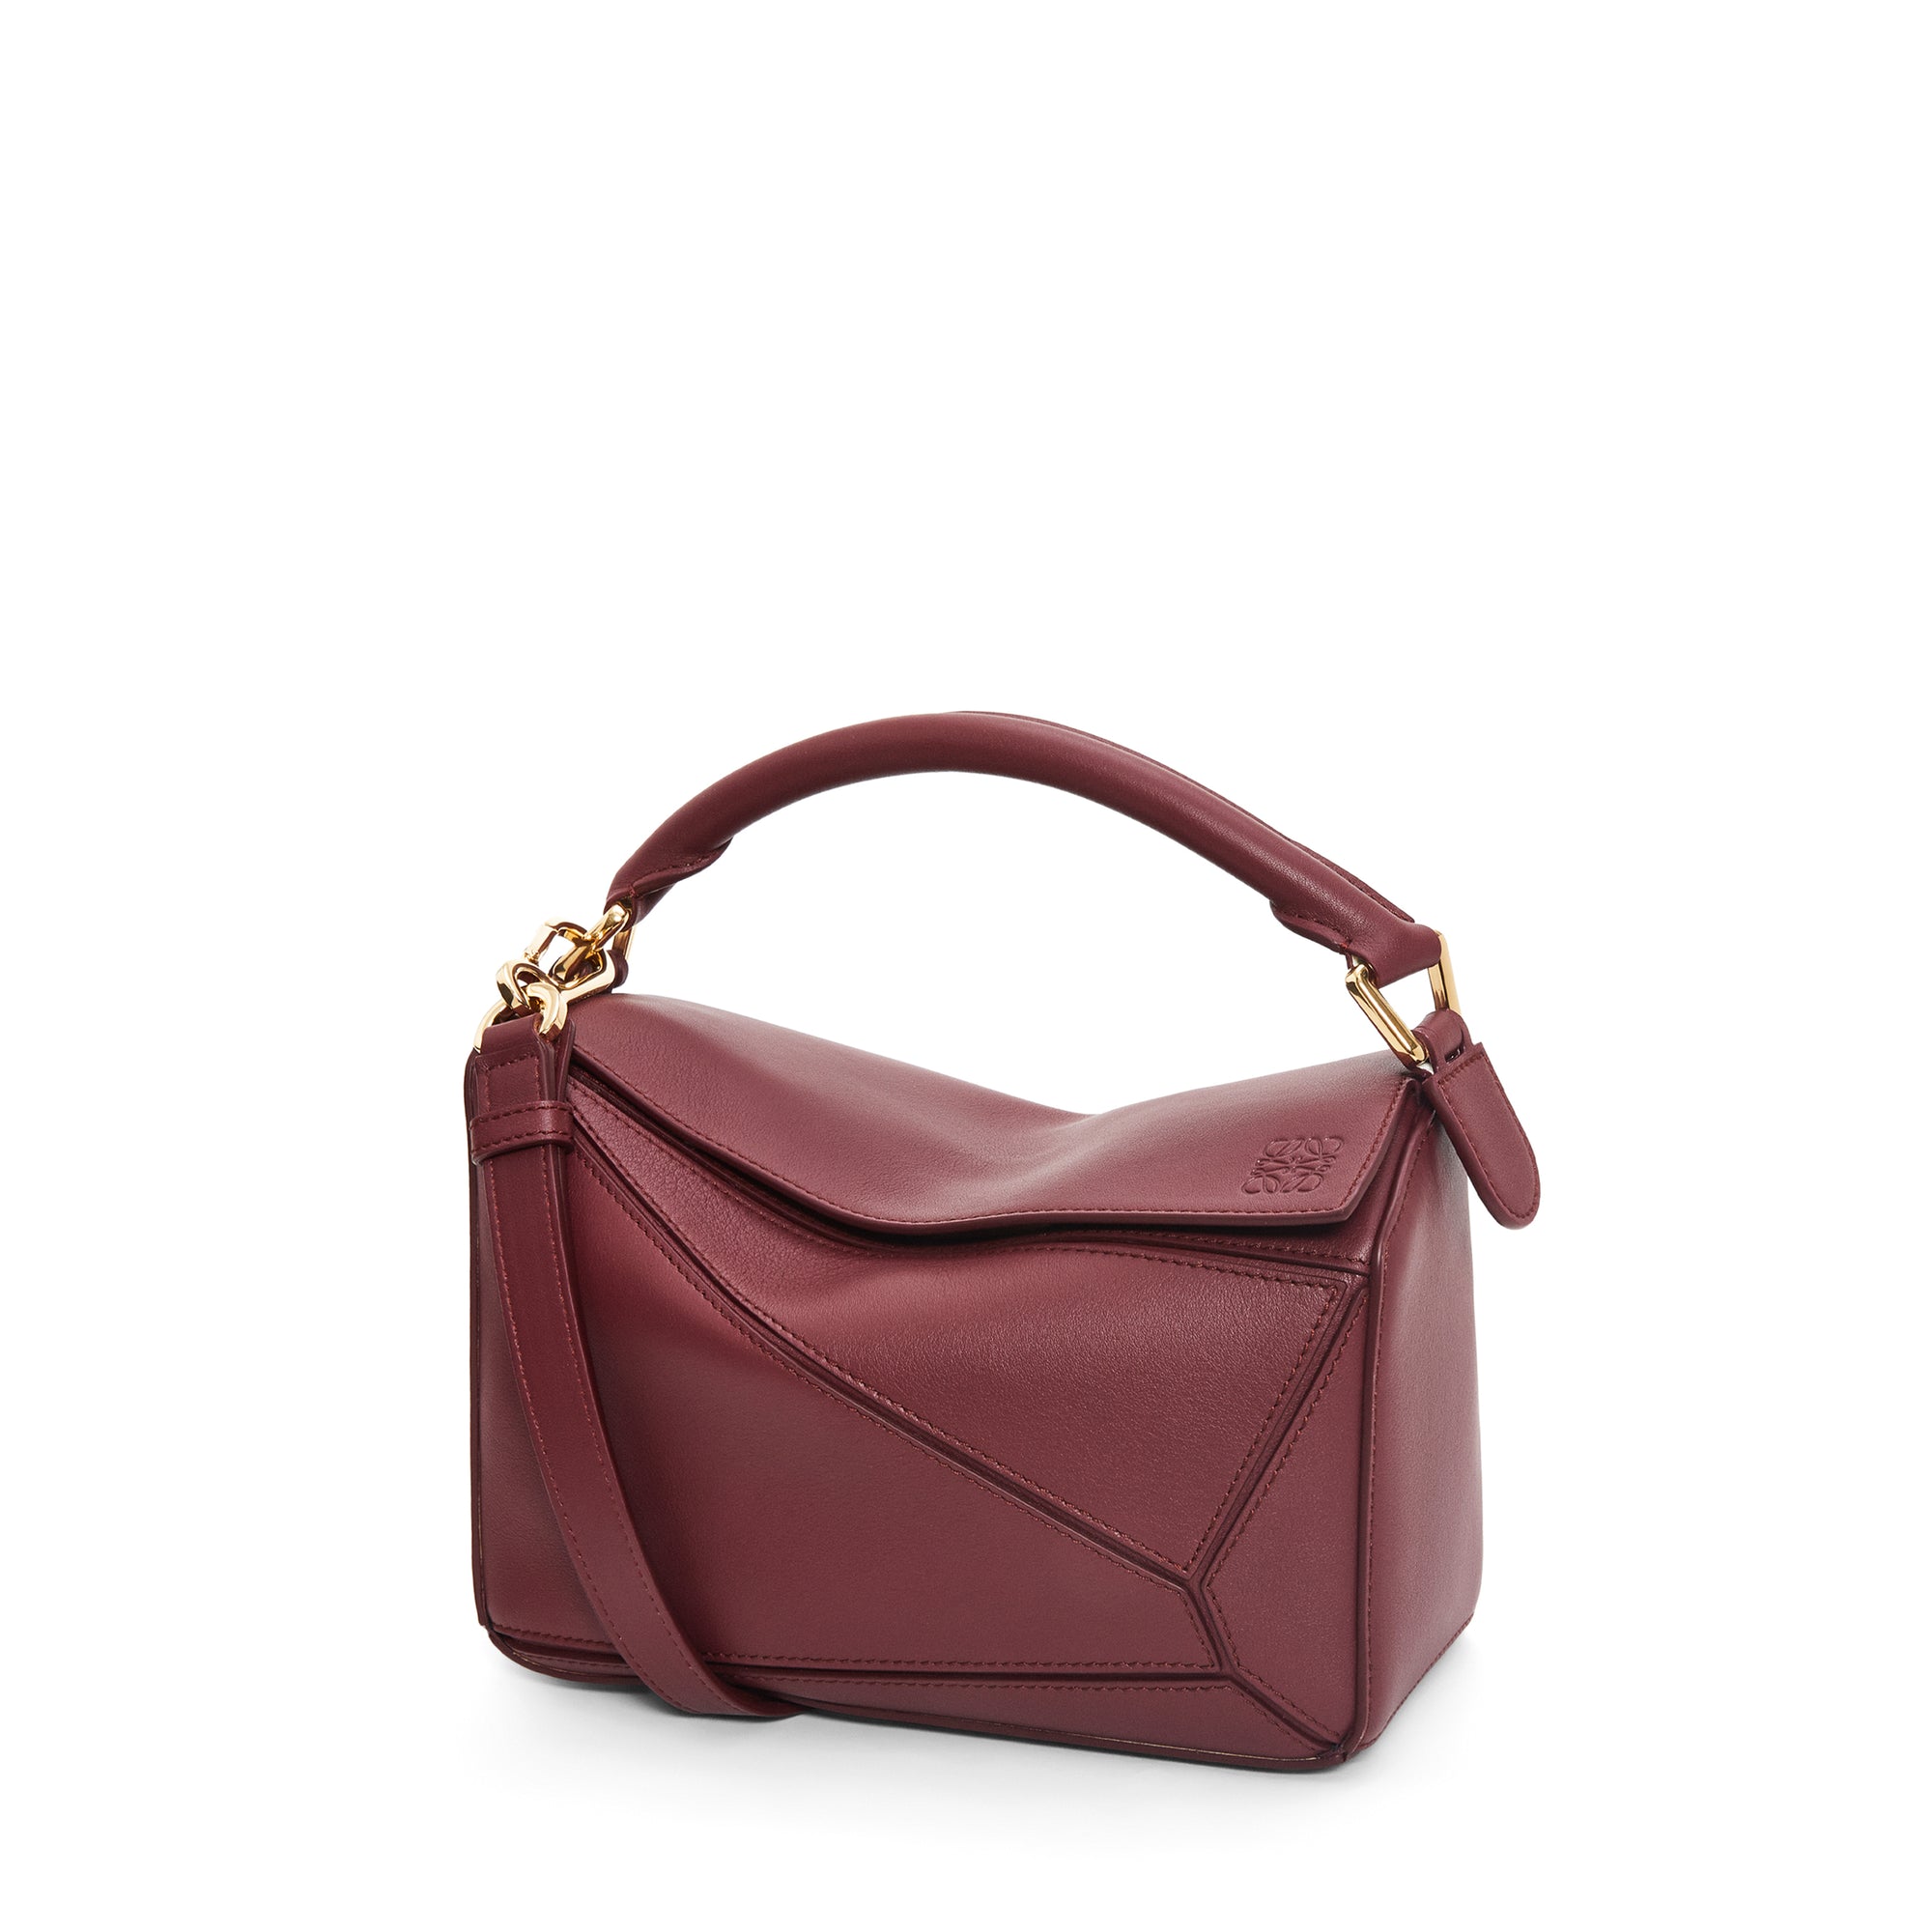 Loewe - Women’s Puzzle Small Bag - (Wild Berry) view 3